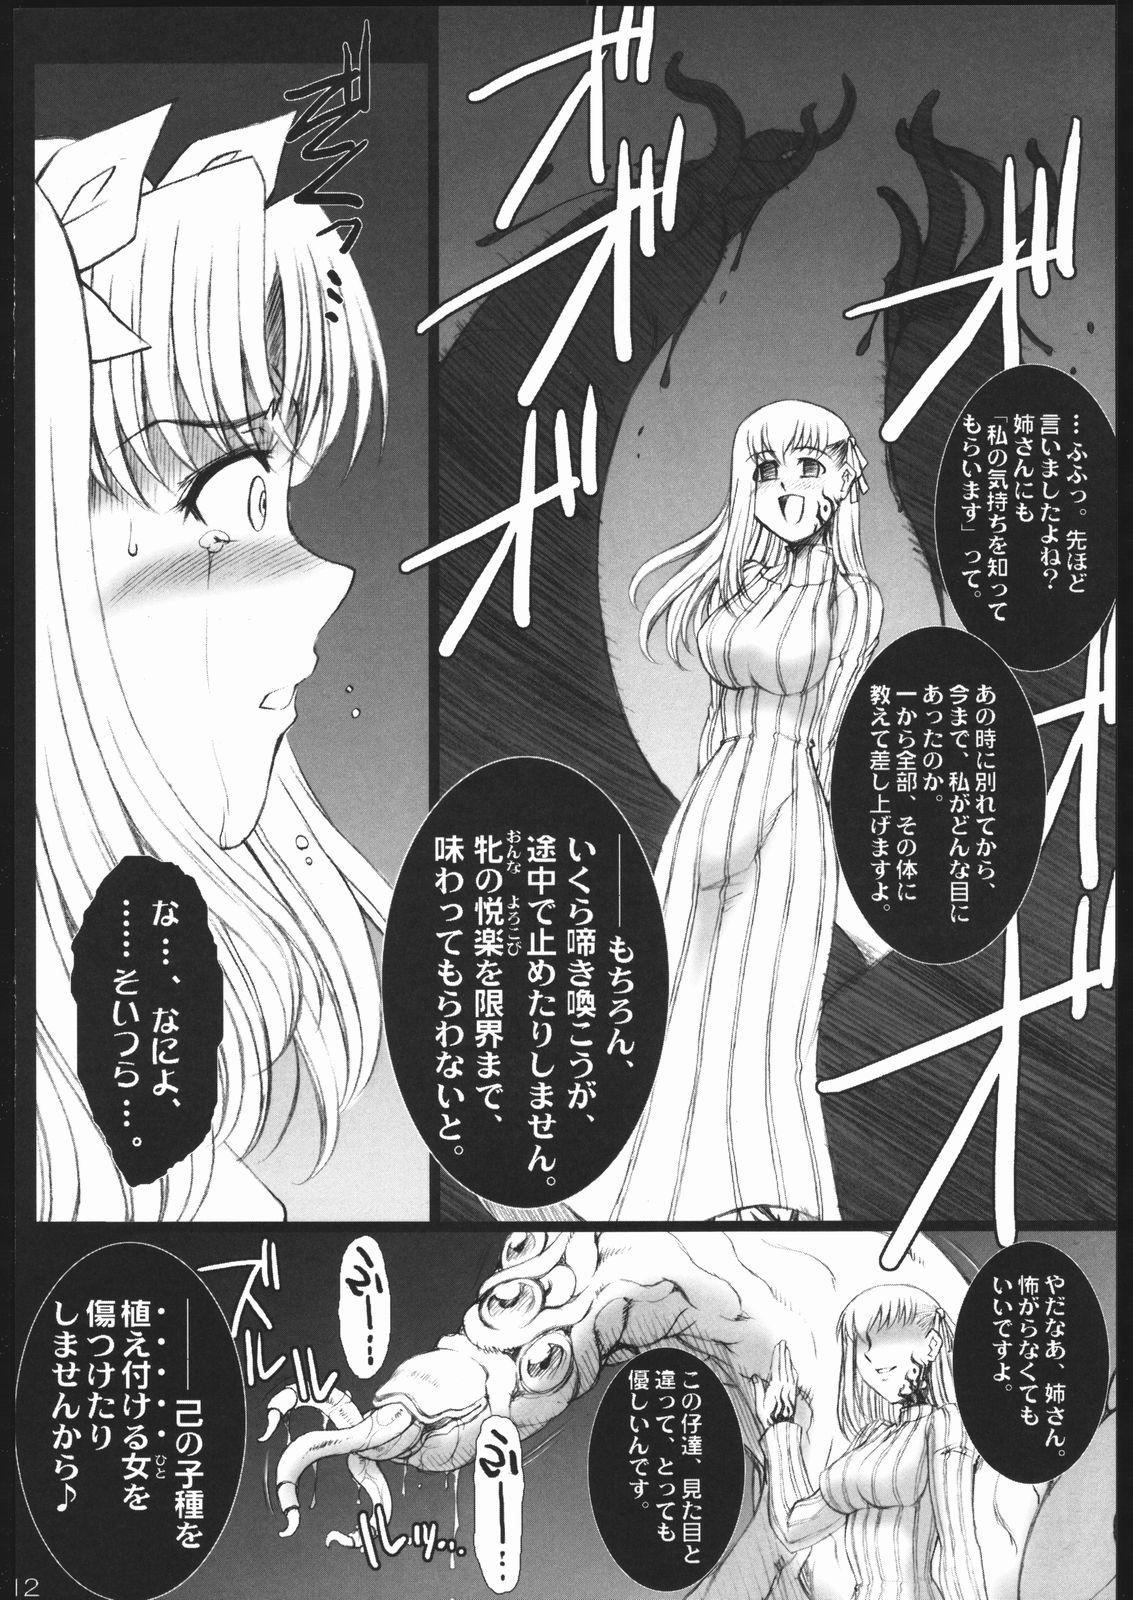 White Chick Red Degeneration - Fate stay night Porno Amateur - Page 11